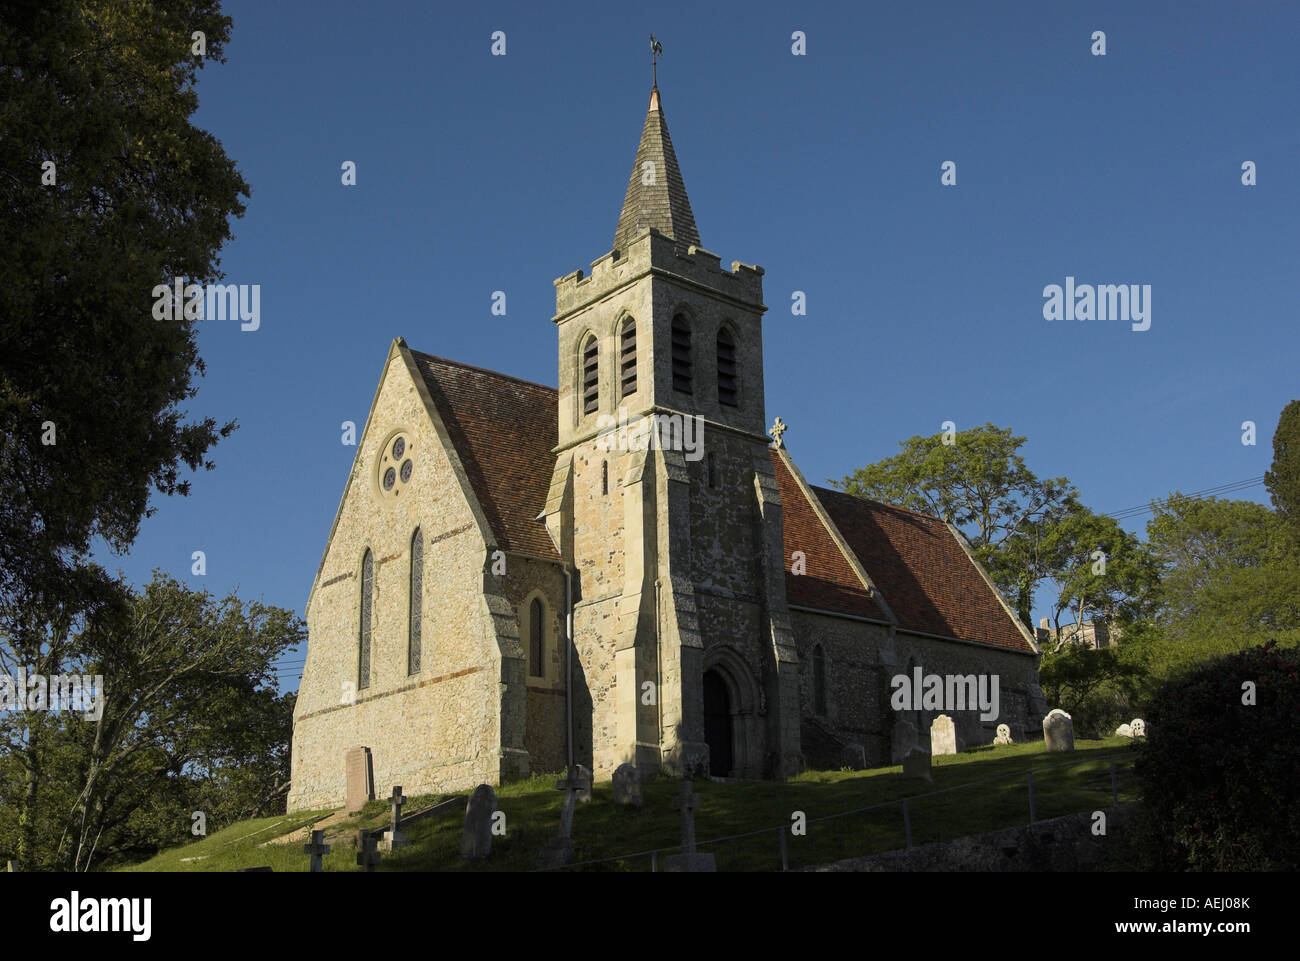 St Mary the Virgin Church, Brook, Isle of Wight, England. Stock Photo